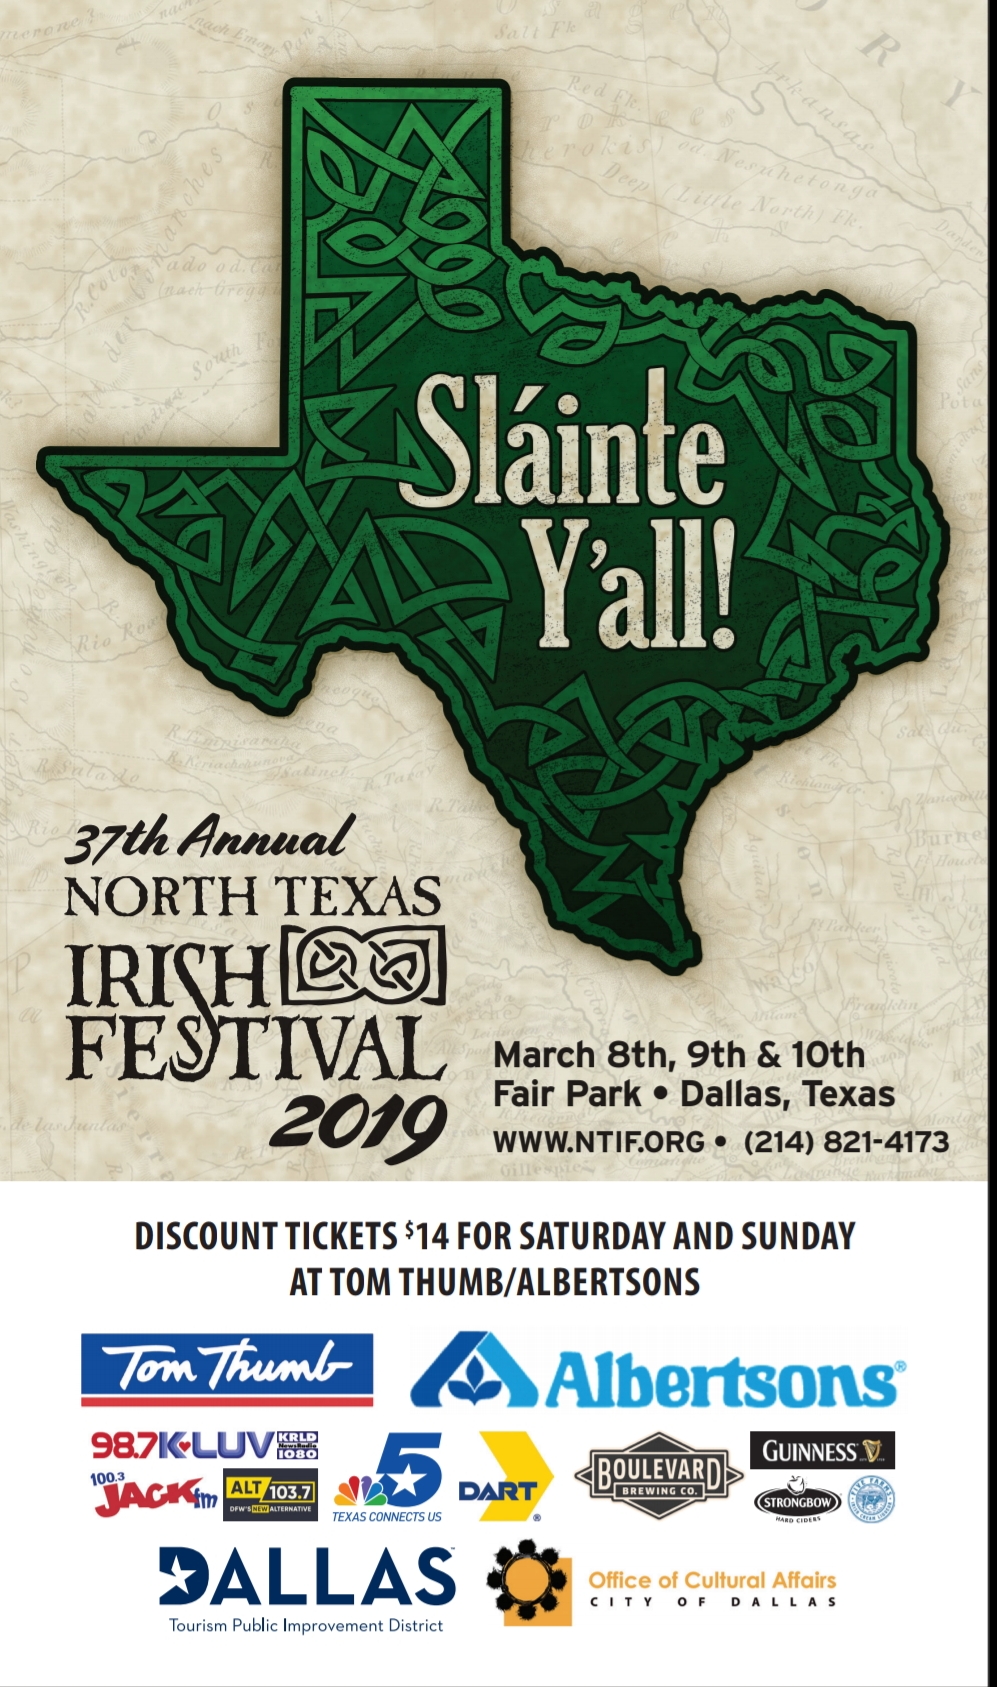 Make your friends GREEN with Envy with Tickets to the North Texas Irish Festival!